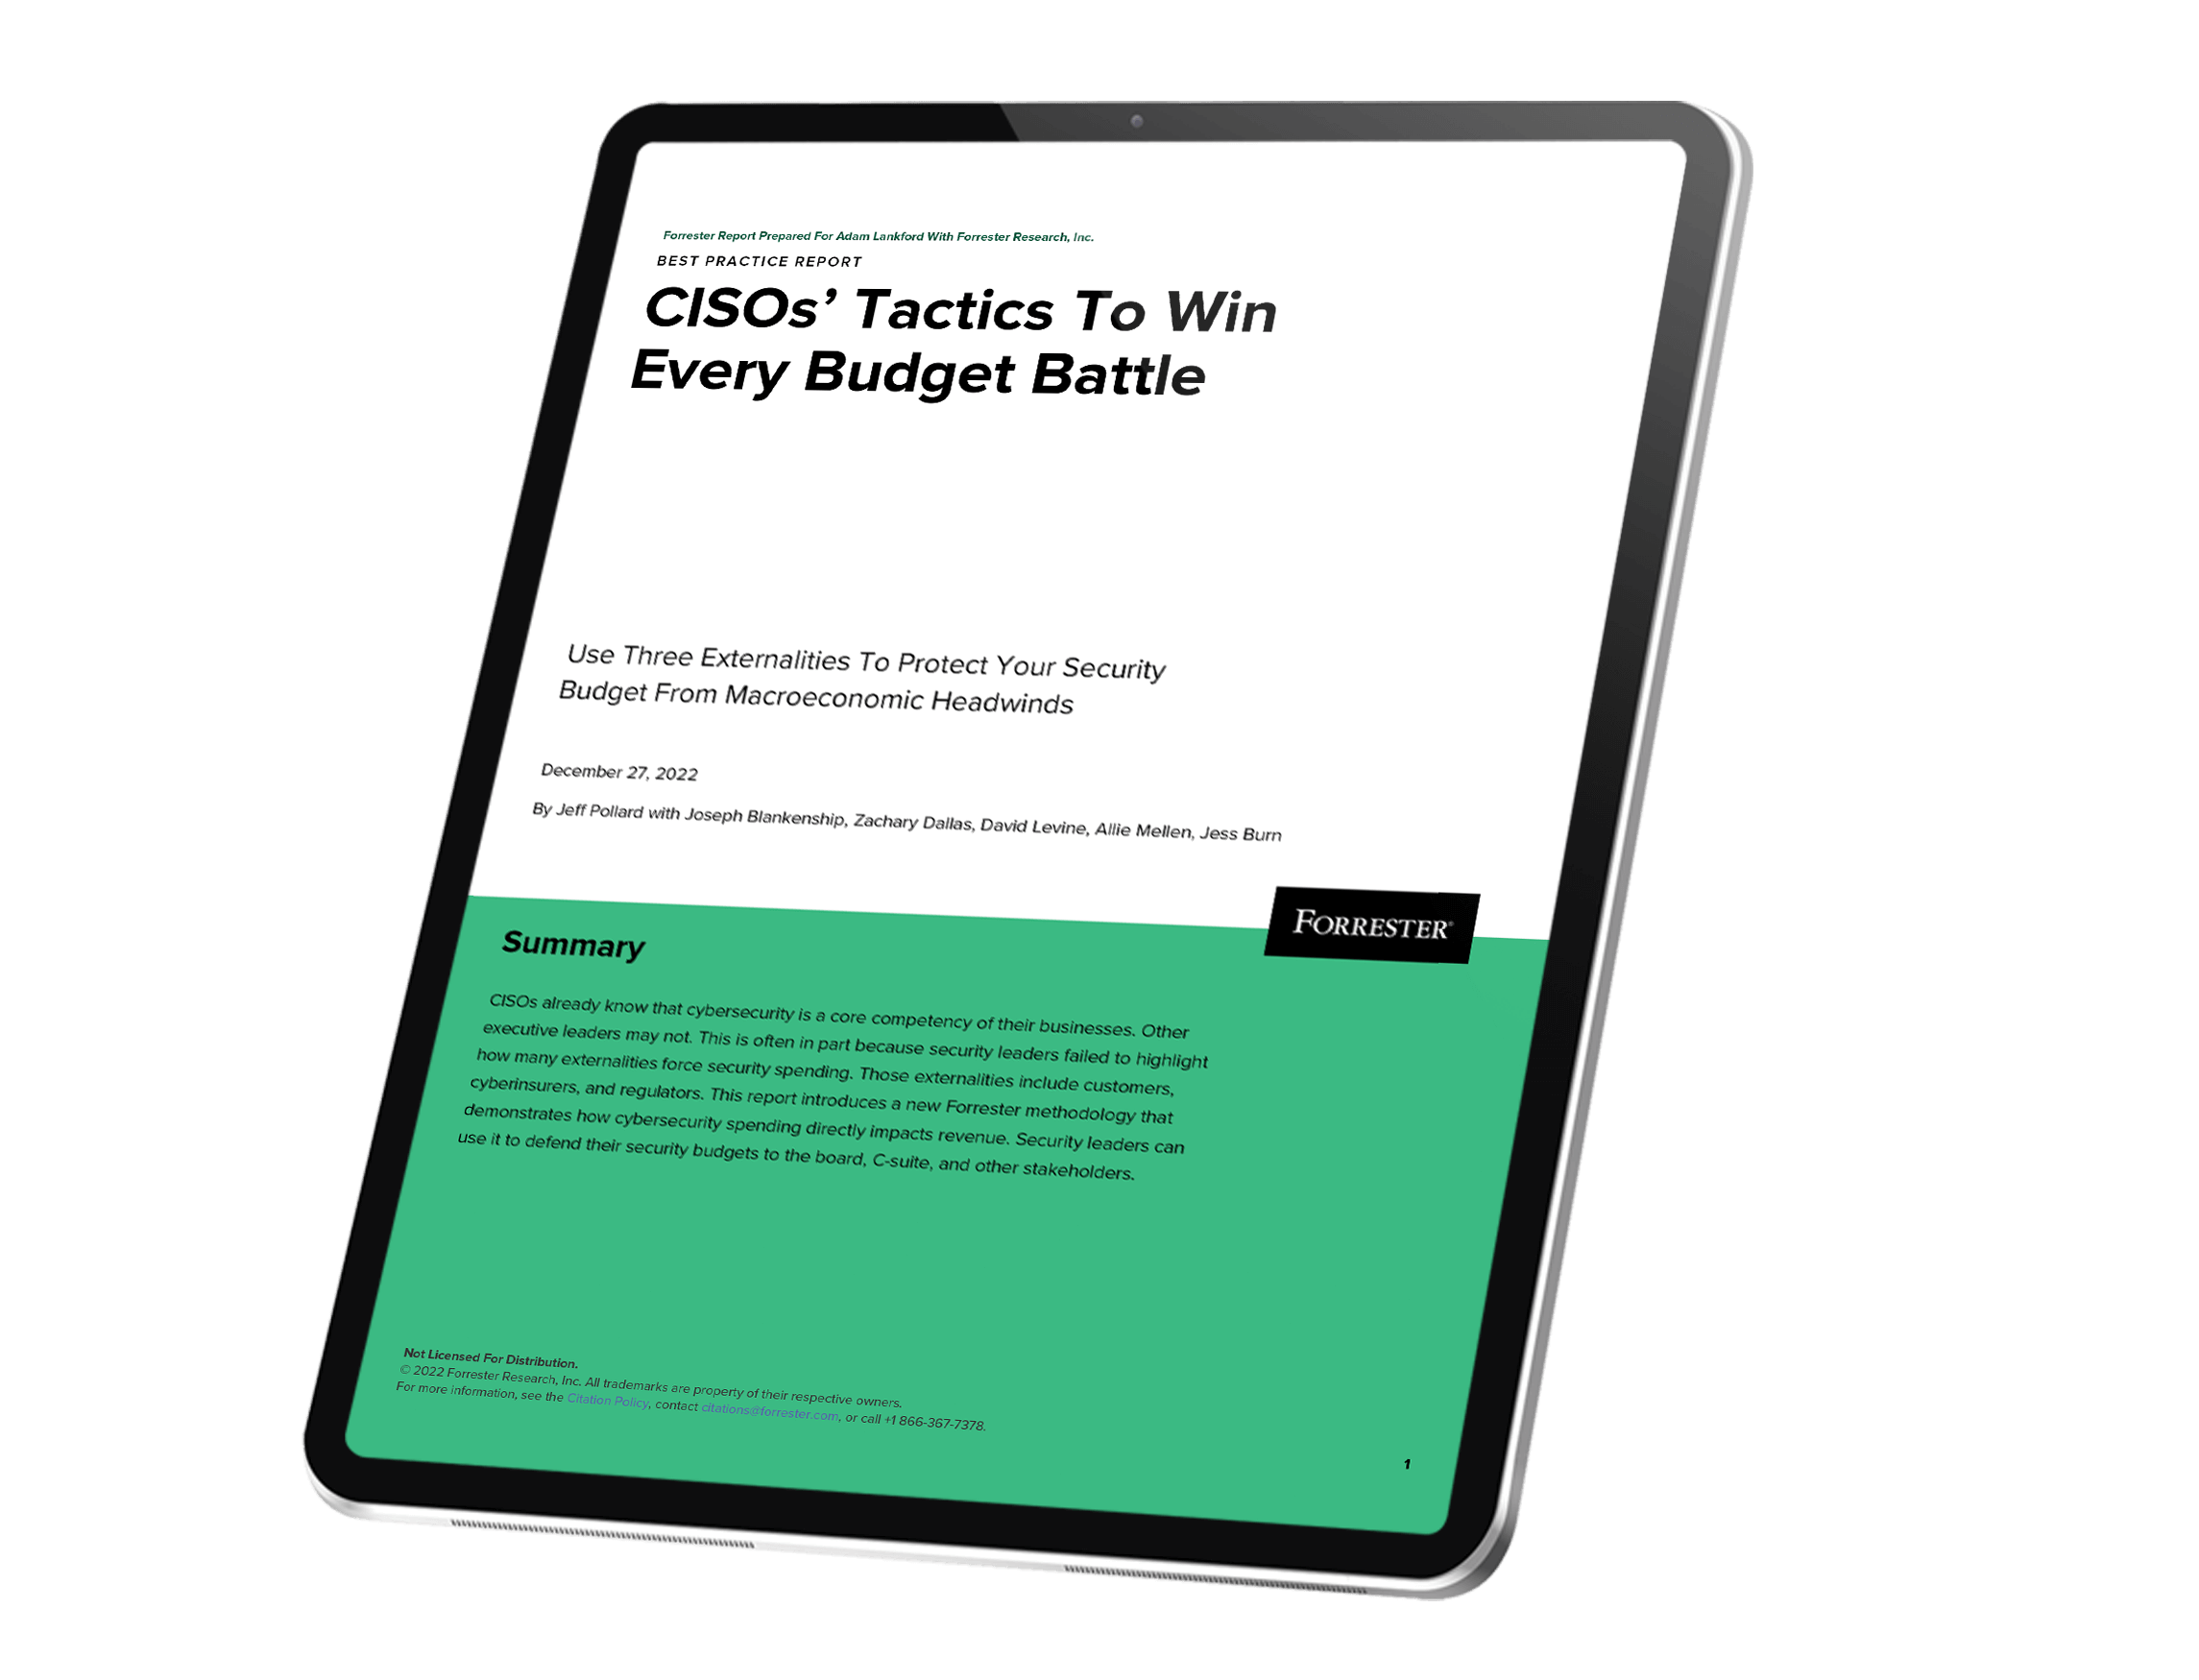 Forrester Report Cover For CISOs Tactics To Win Every Budget Battle